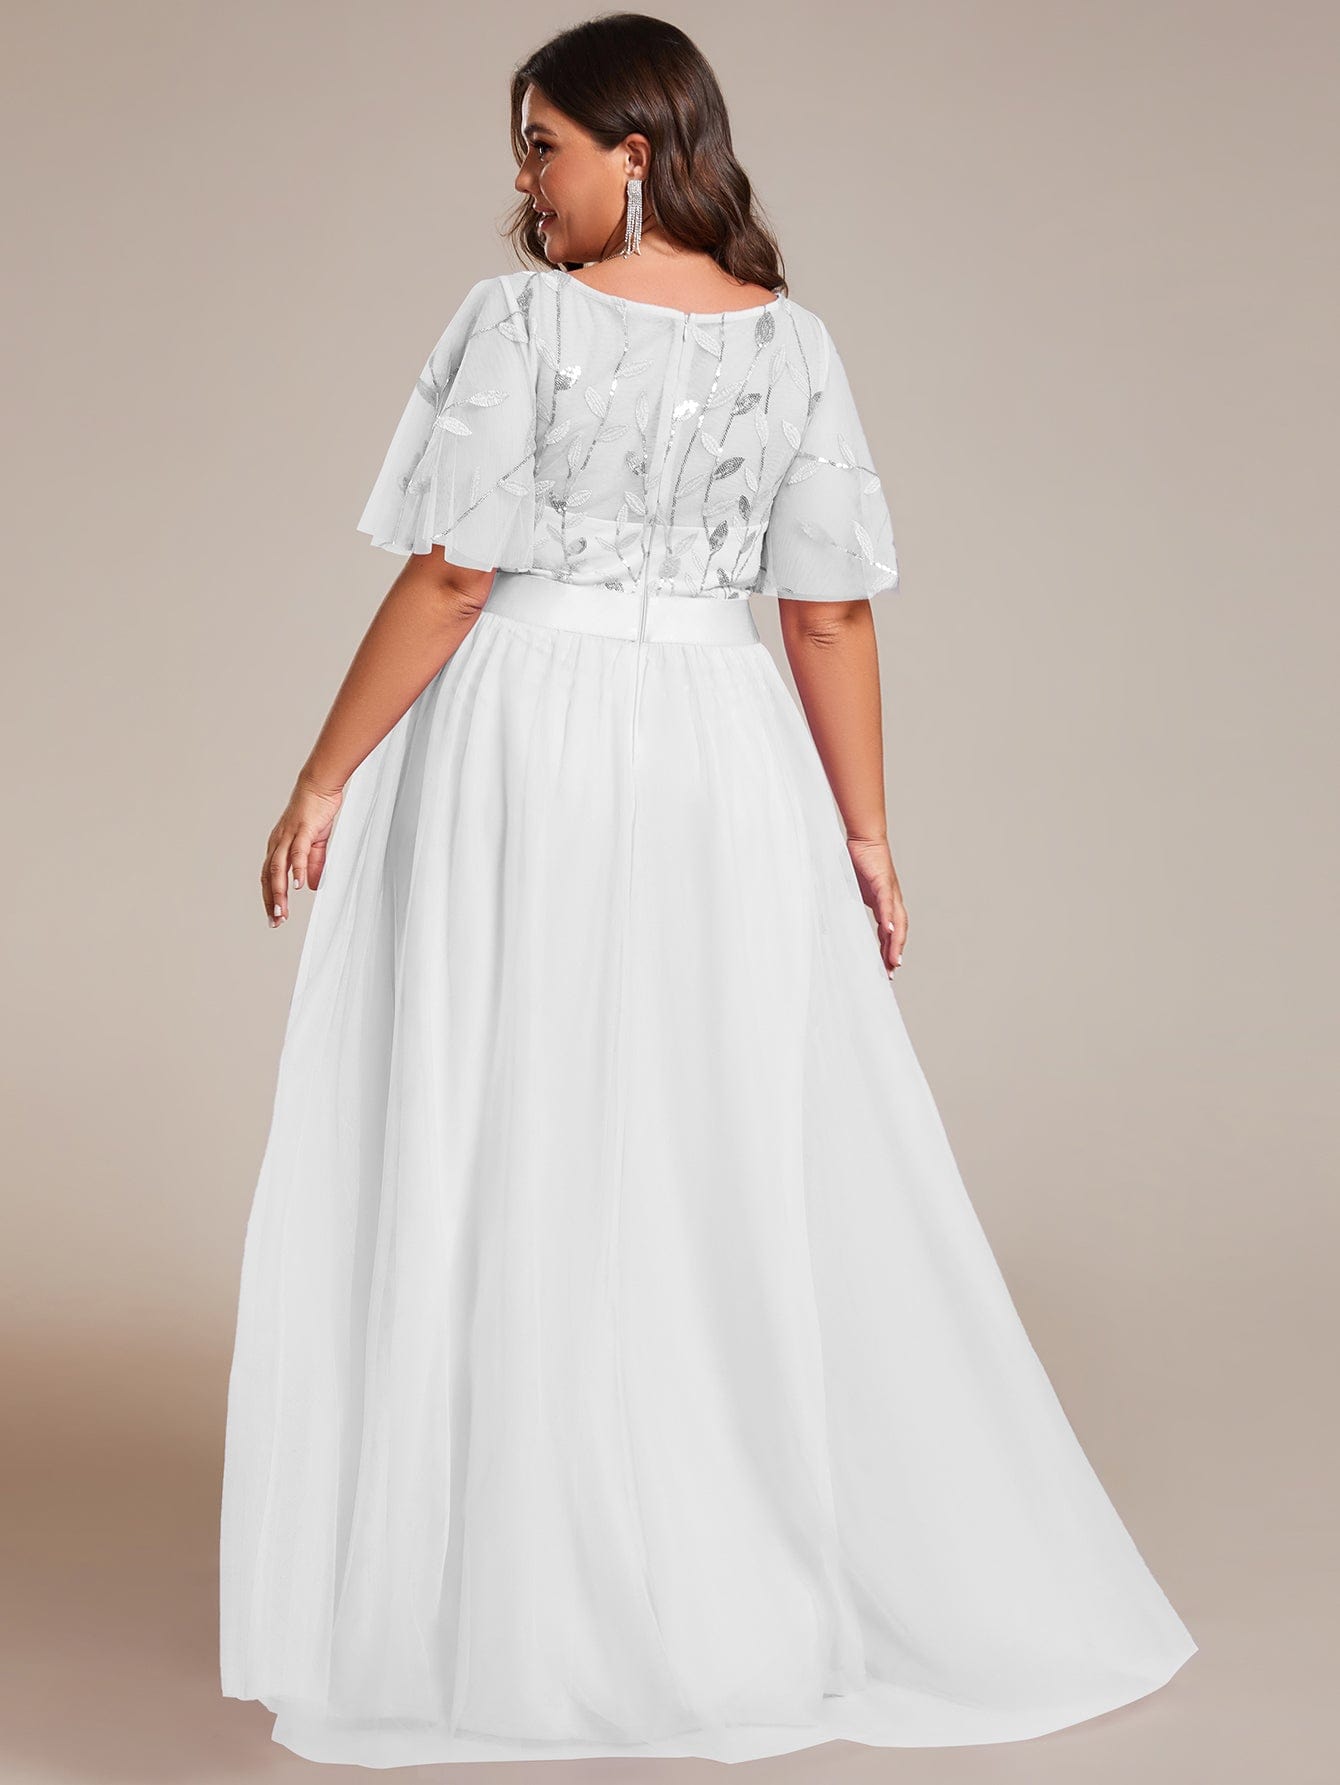 Plus Size Women's Embroidery Bridesmaid Dress with Short Sleeve #color_White